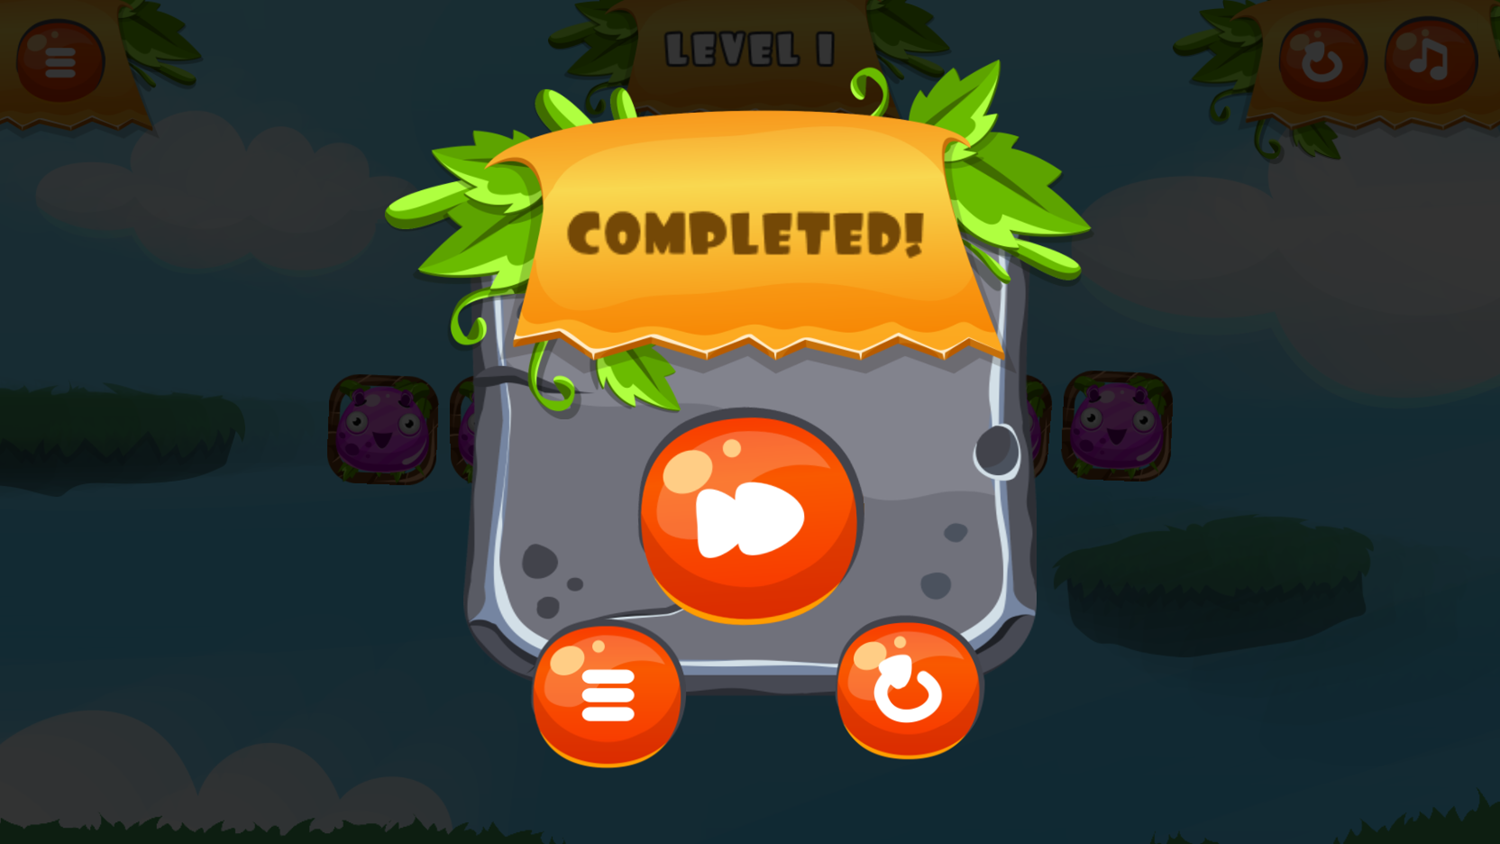 Happy Monsters Game Level Completed Screenshot.